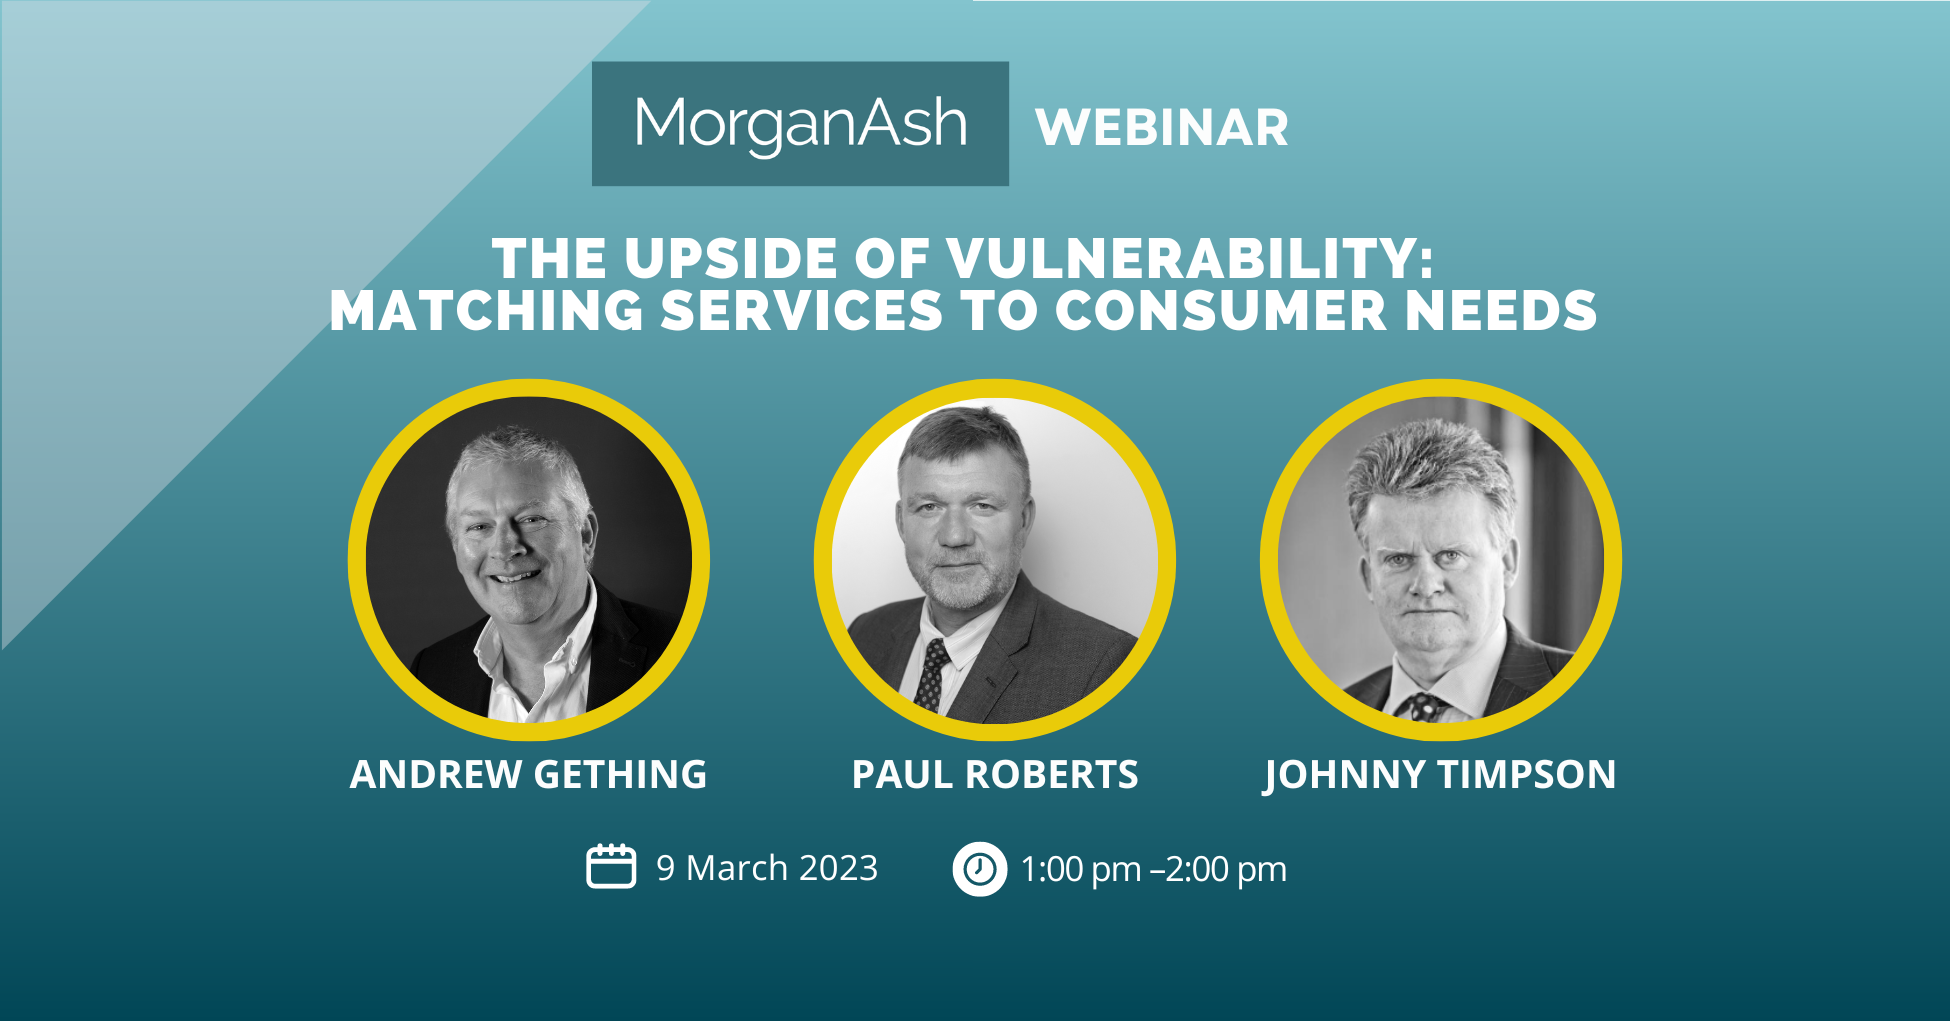 The upside of vulnerability – matching services to consumer needs